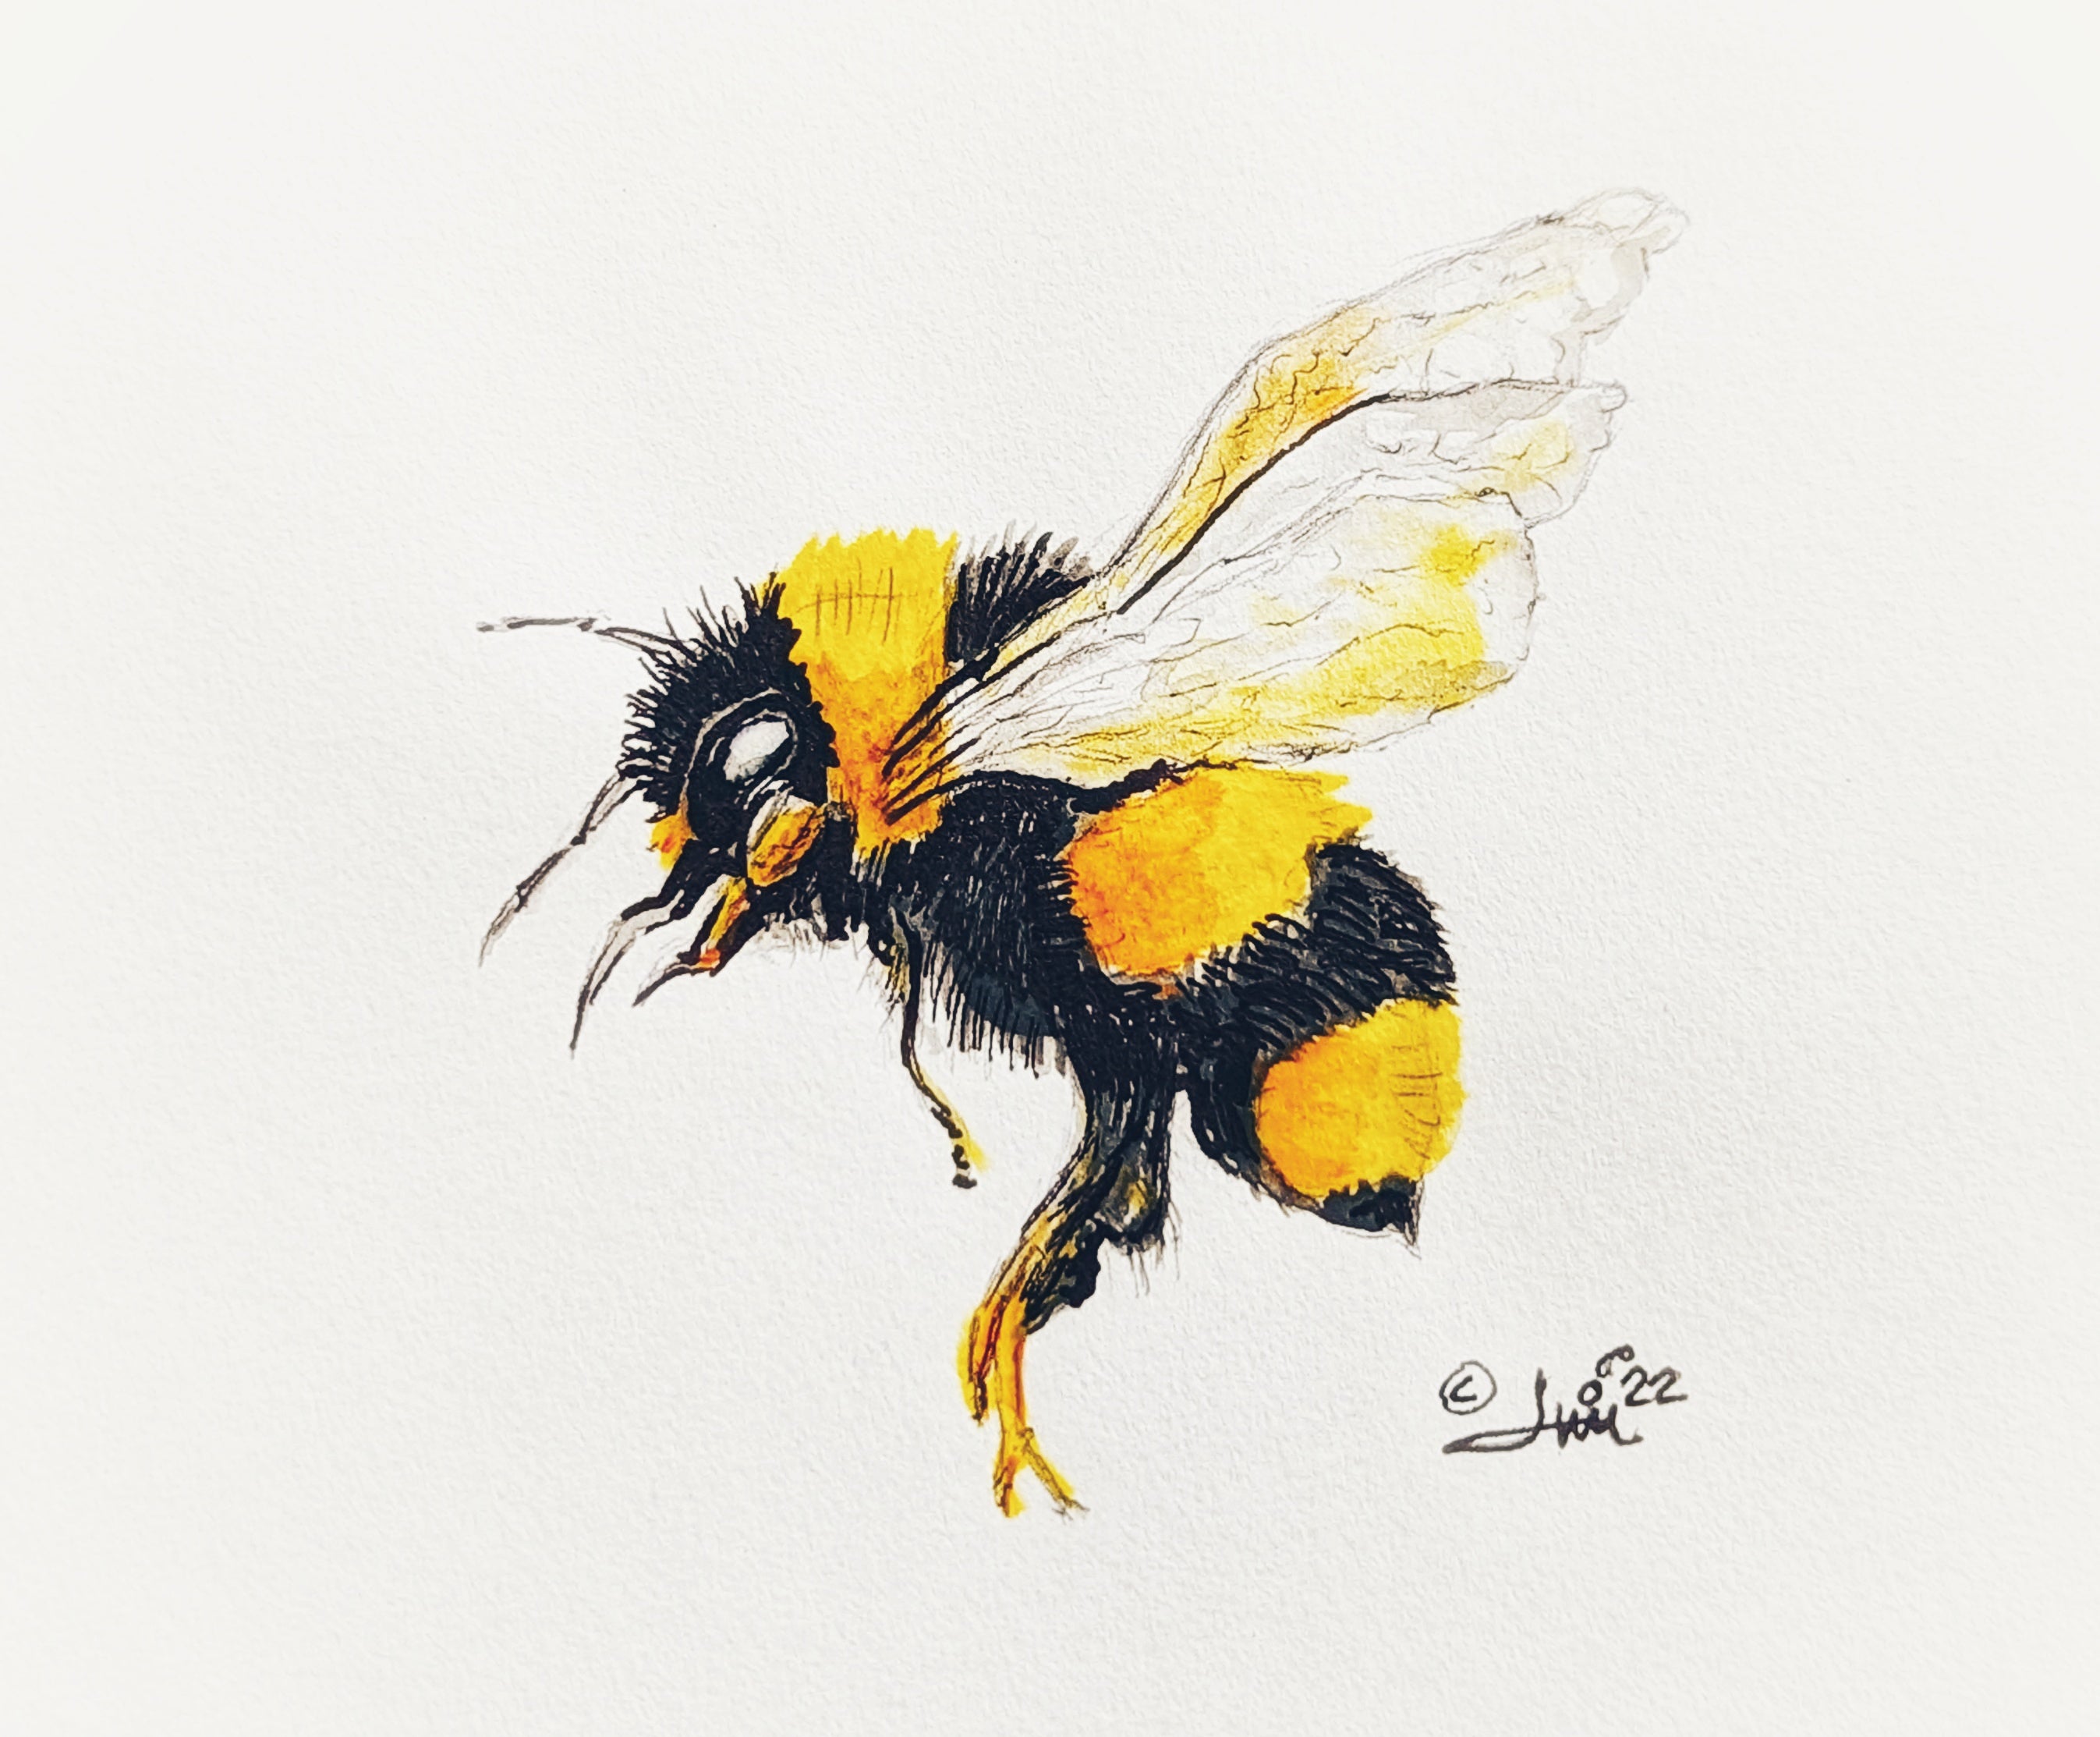 A print of my original artwork of a flying bee in yellow and black. The original was drawn and painted in  pen, and watercolor. 